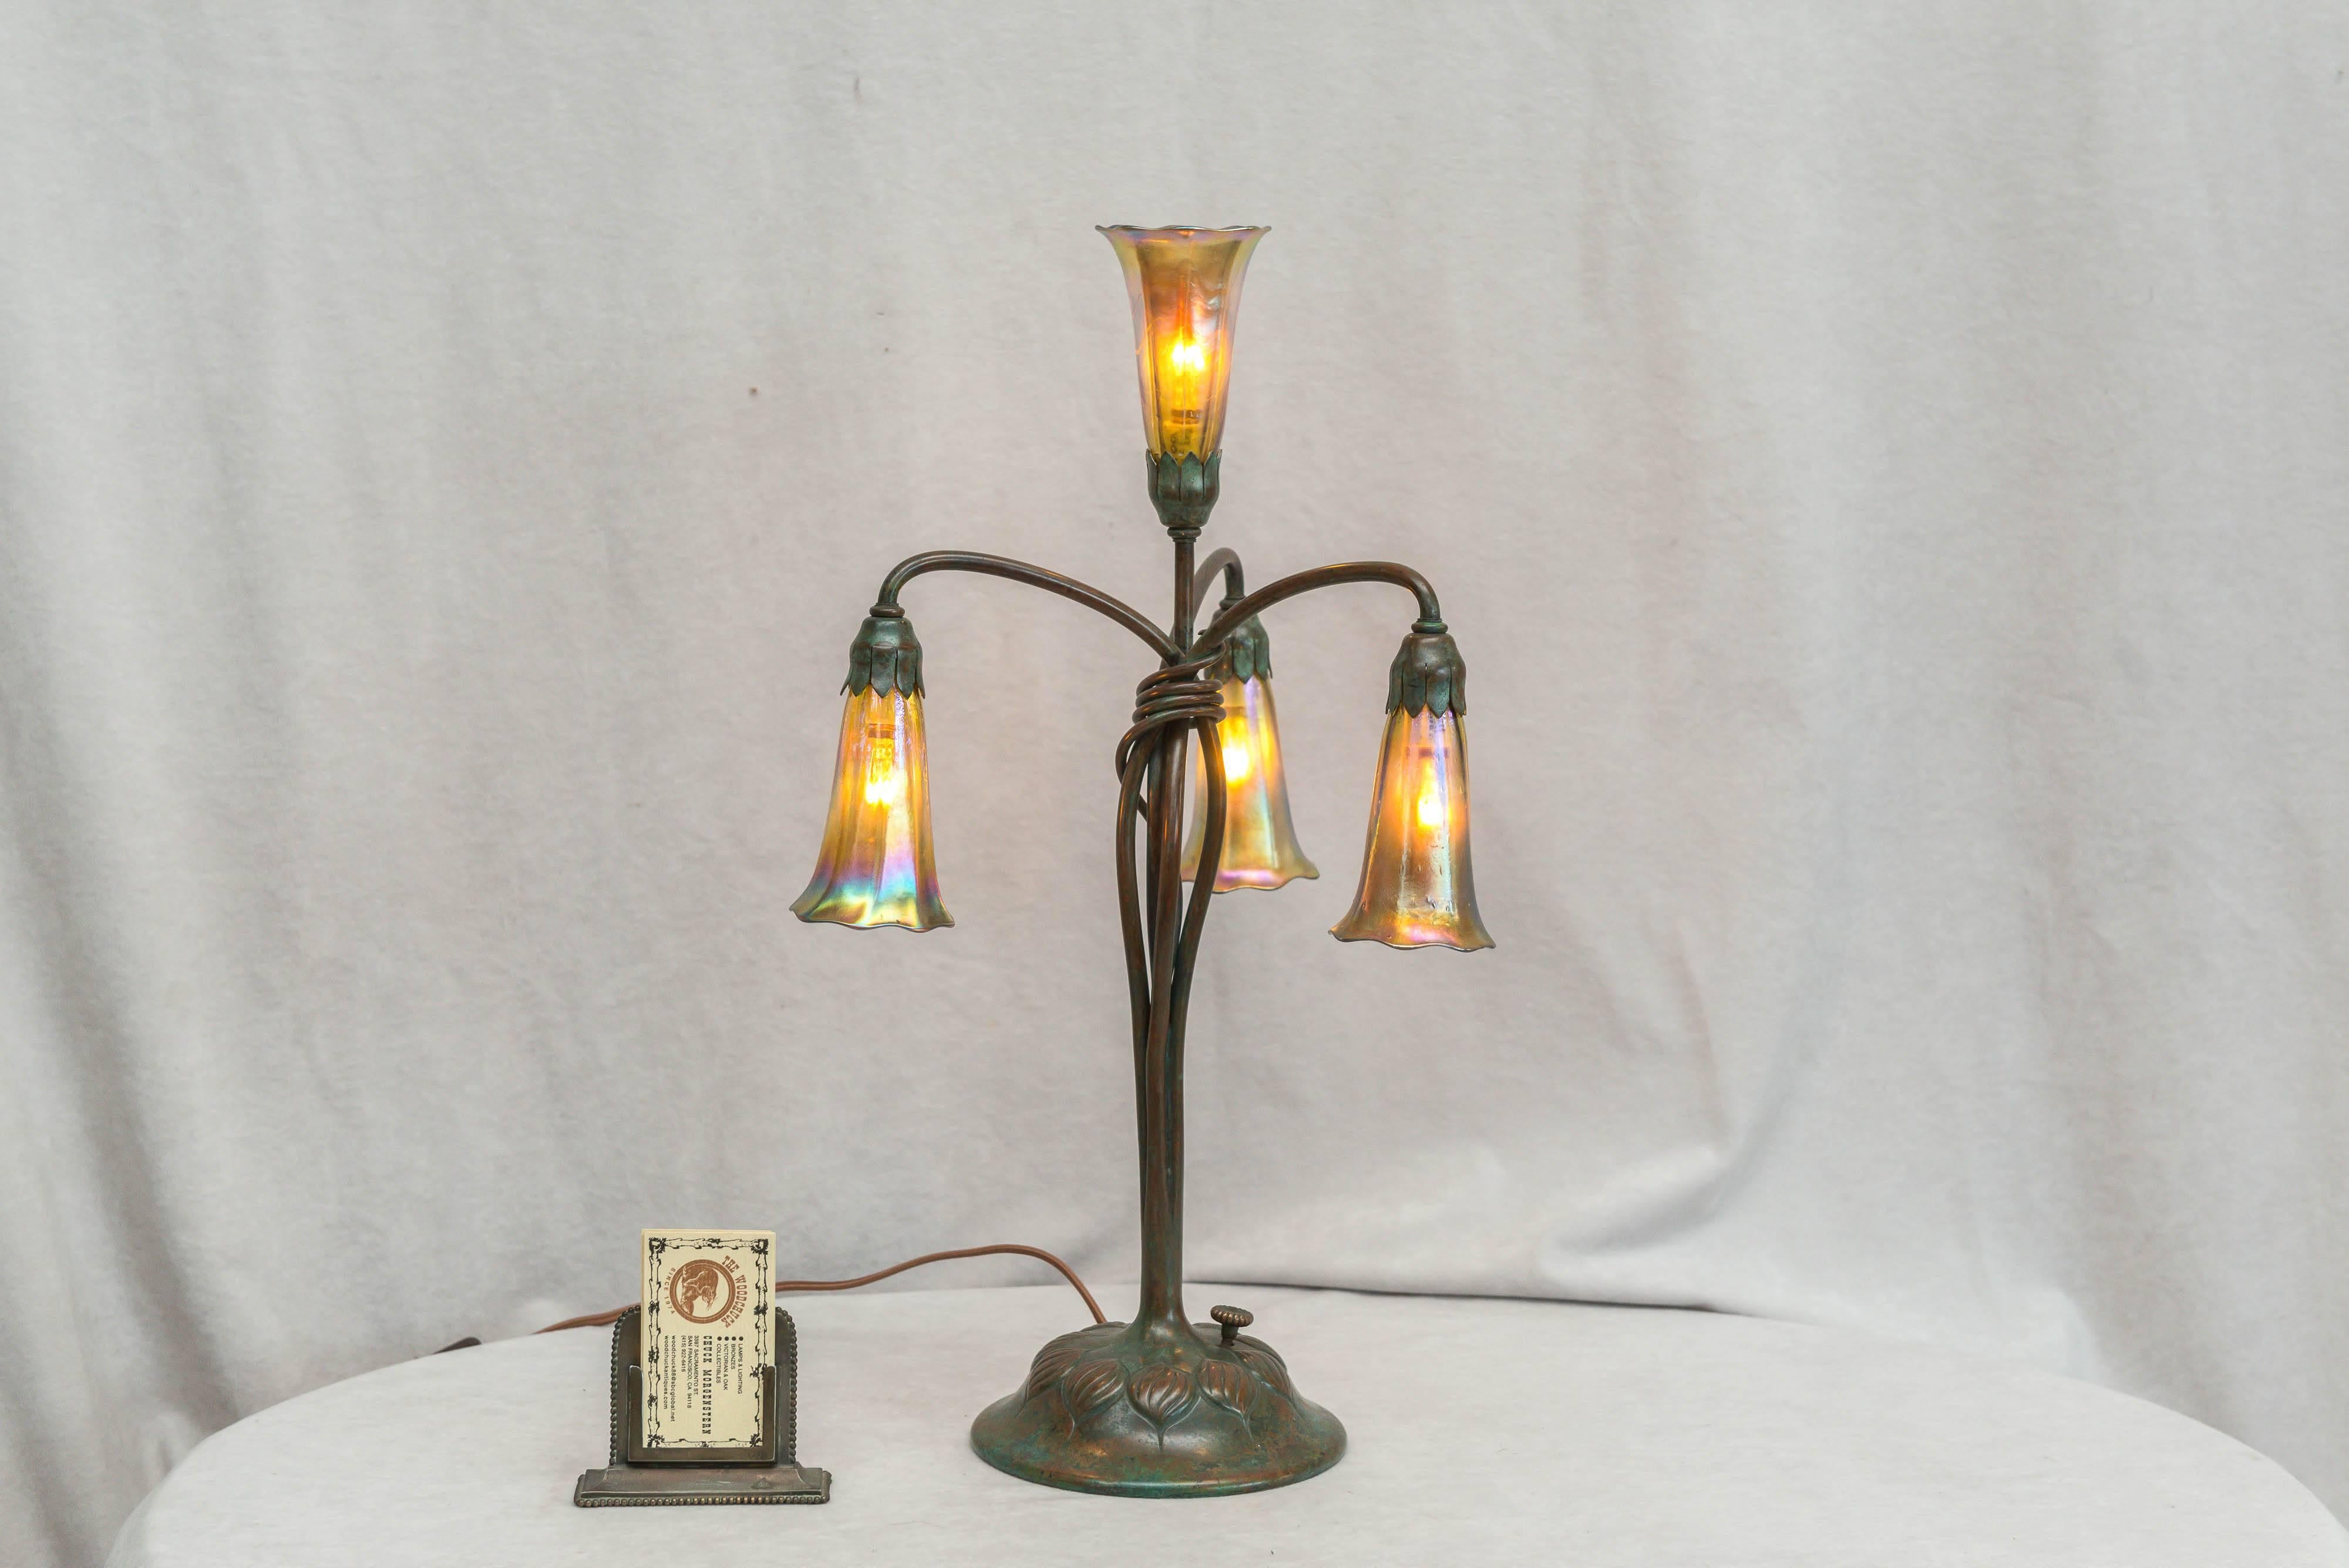 One of the more popular and desirable lamps by the renown Tiffany Studios, is their lily lamps. The base and all the shades are properly signed. The base has that beautiful verdigris patina, and the shades are of course all handblown. There is some